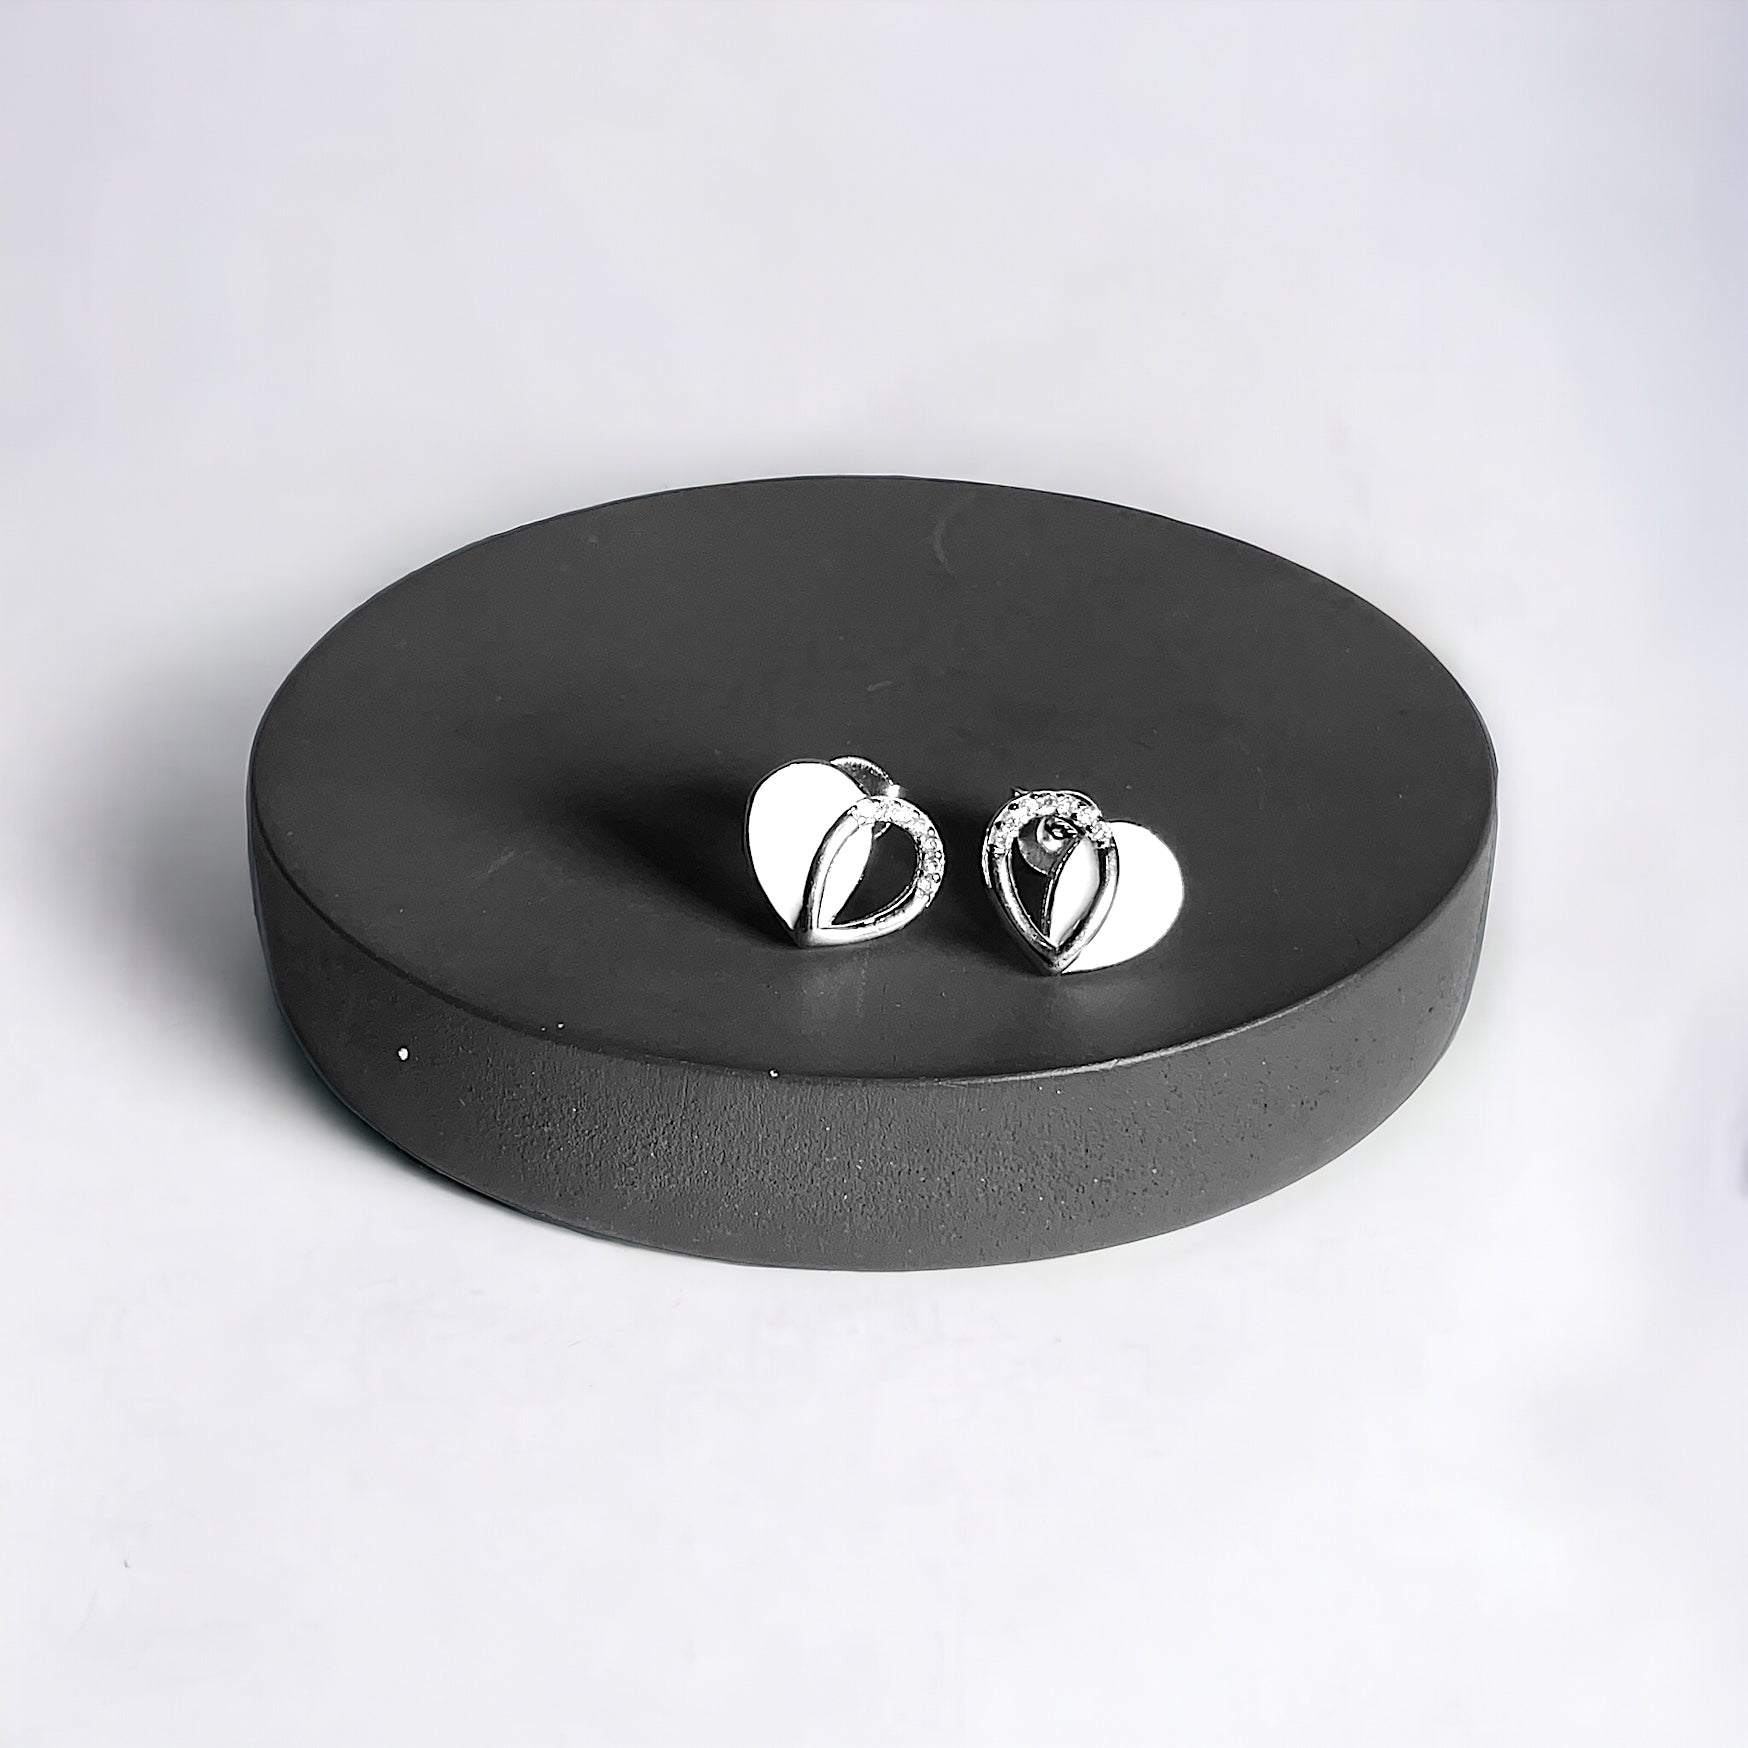 a pair of silver earrings sitting on top of a black plate